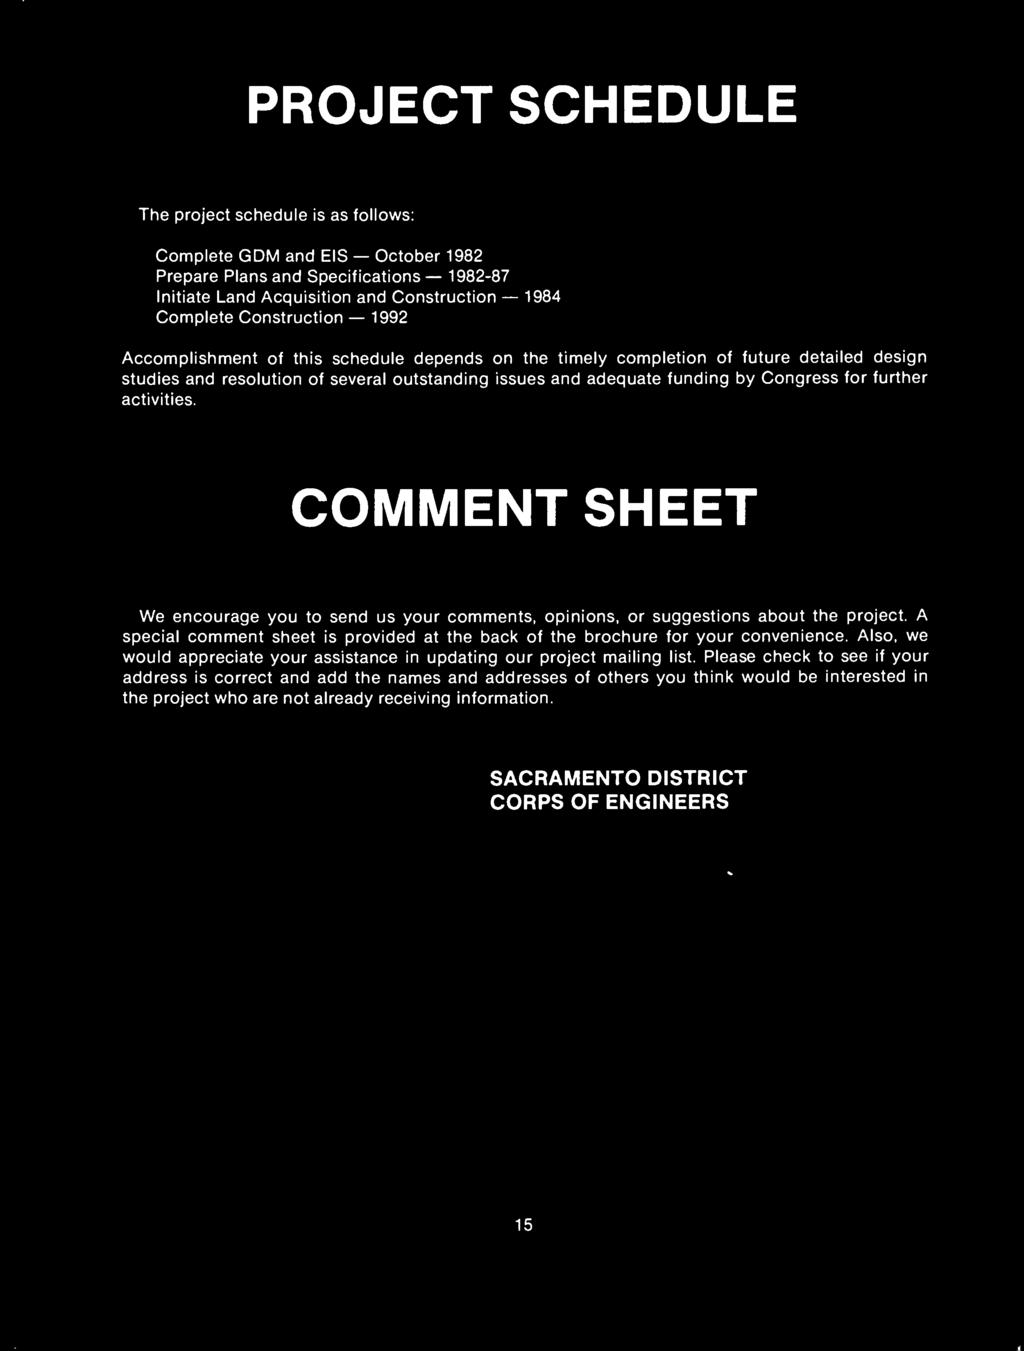 A special comment sheet is provided at the back of the brochure for your convenience.